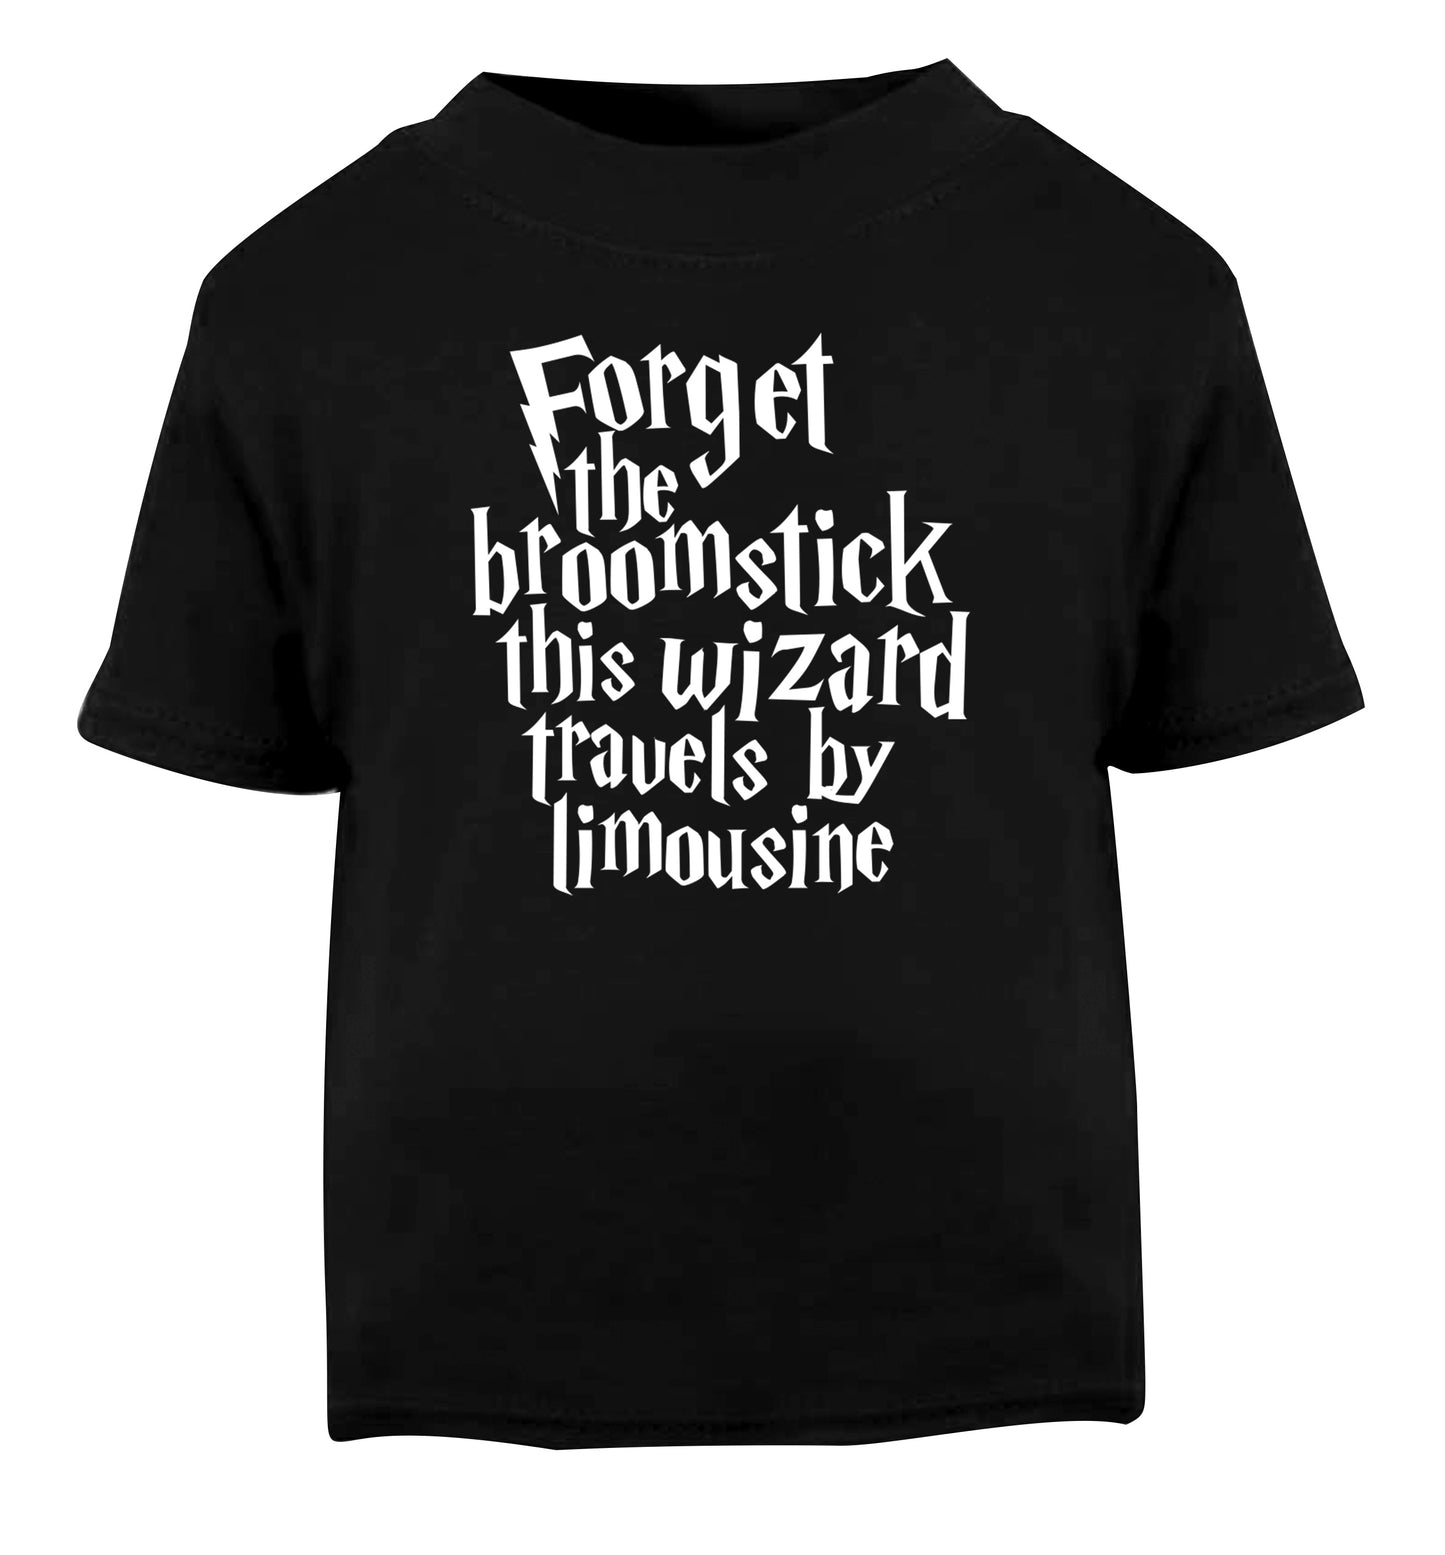 Forget the broomstick this wizard travels by limousine Black Baby Toddler Tshirt 2 years